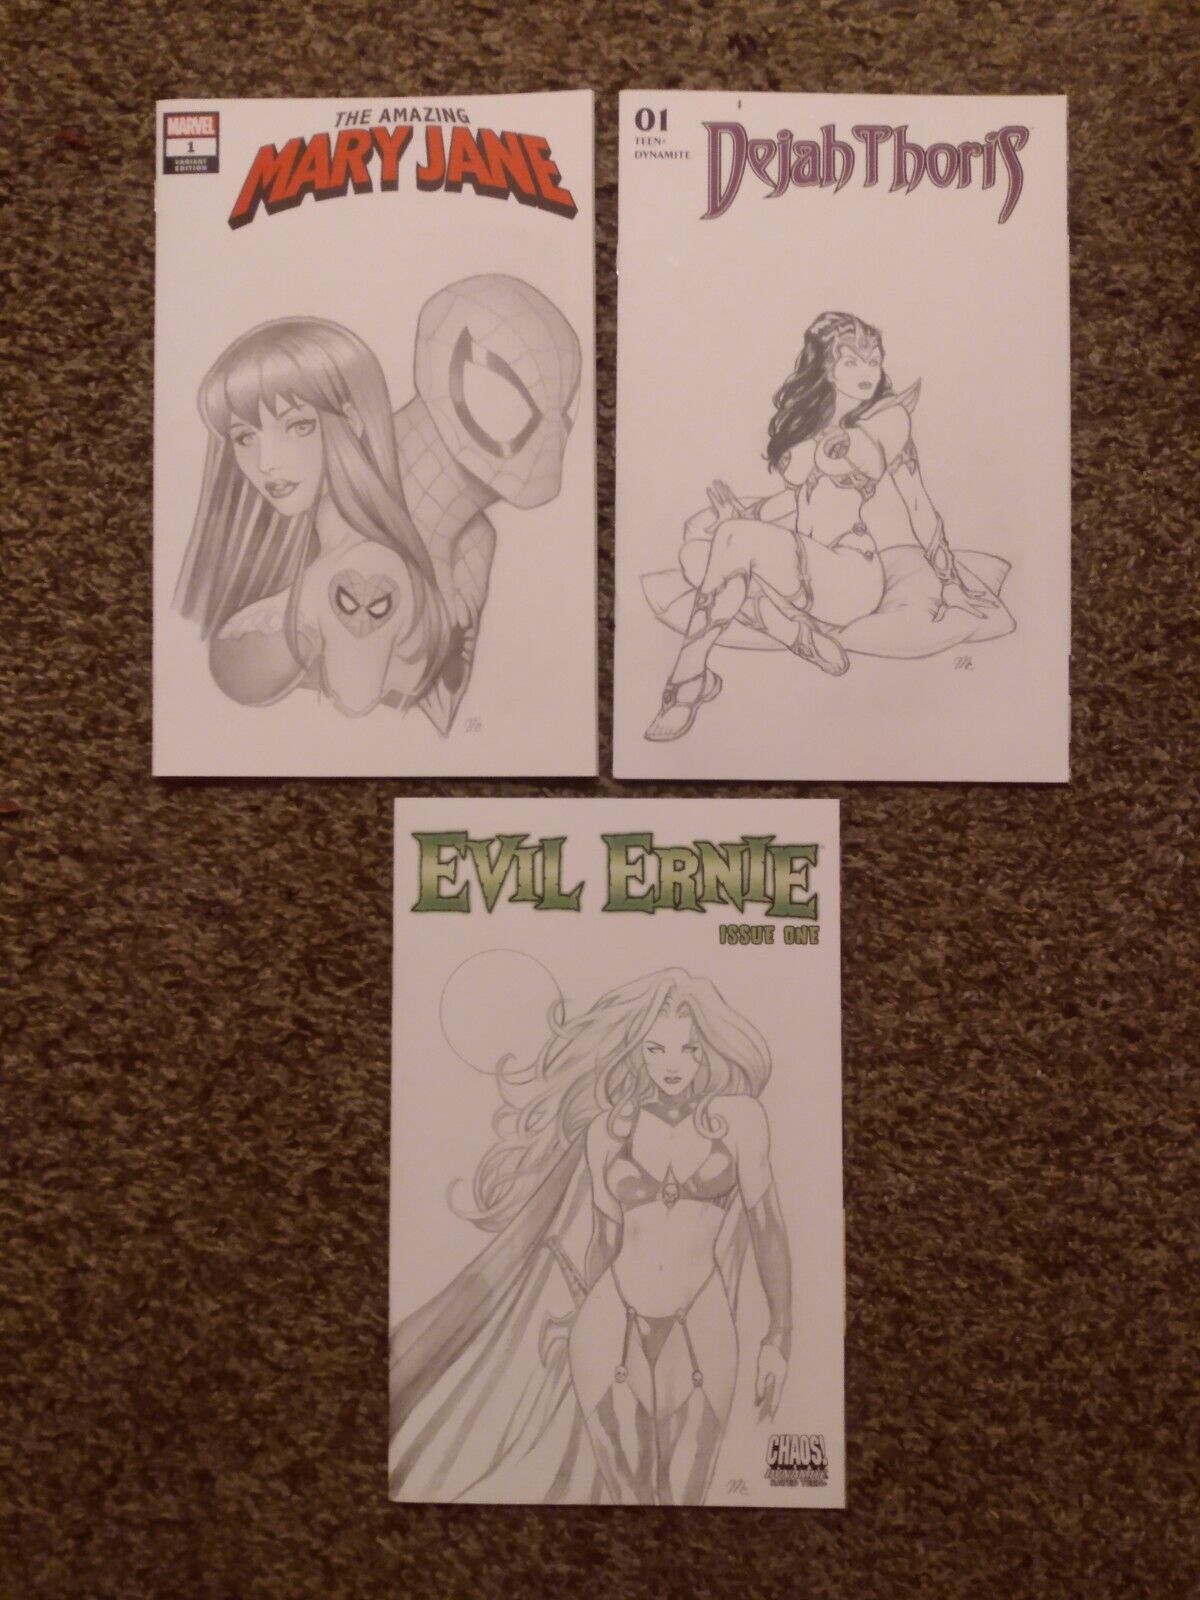 LOT OF 3 ORIGINAL ART SKETCH COVERS MARY JANE DEJAH THORIS LADY DEATH CAMPBELL